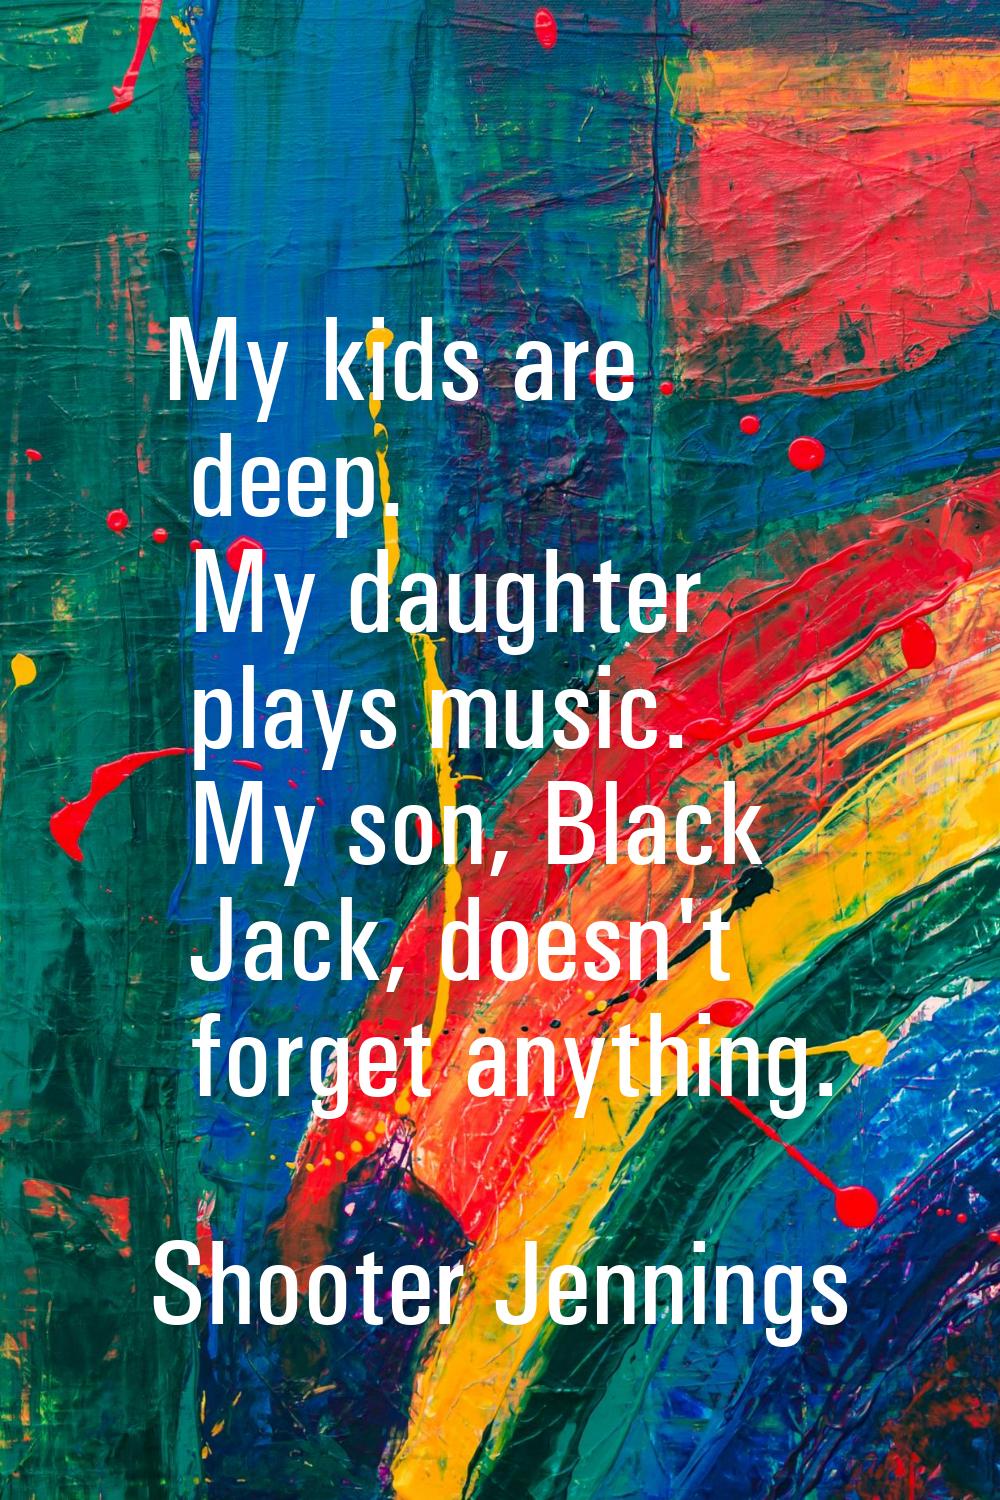 My kids are deep. My daughter plays music. My son, Black Jack, doesn't forget anything.